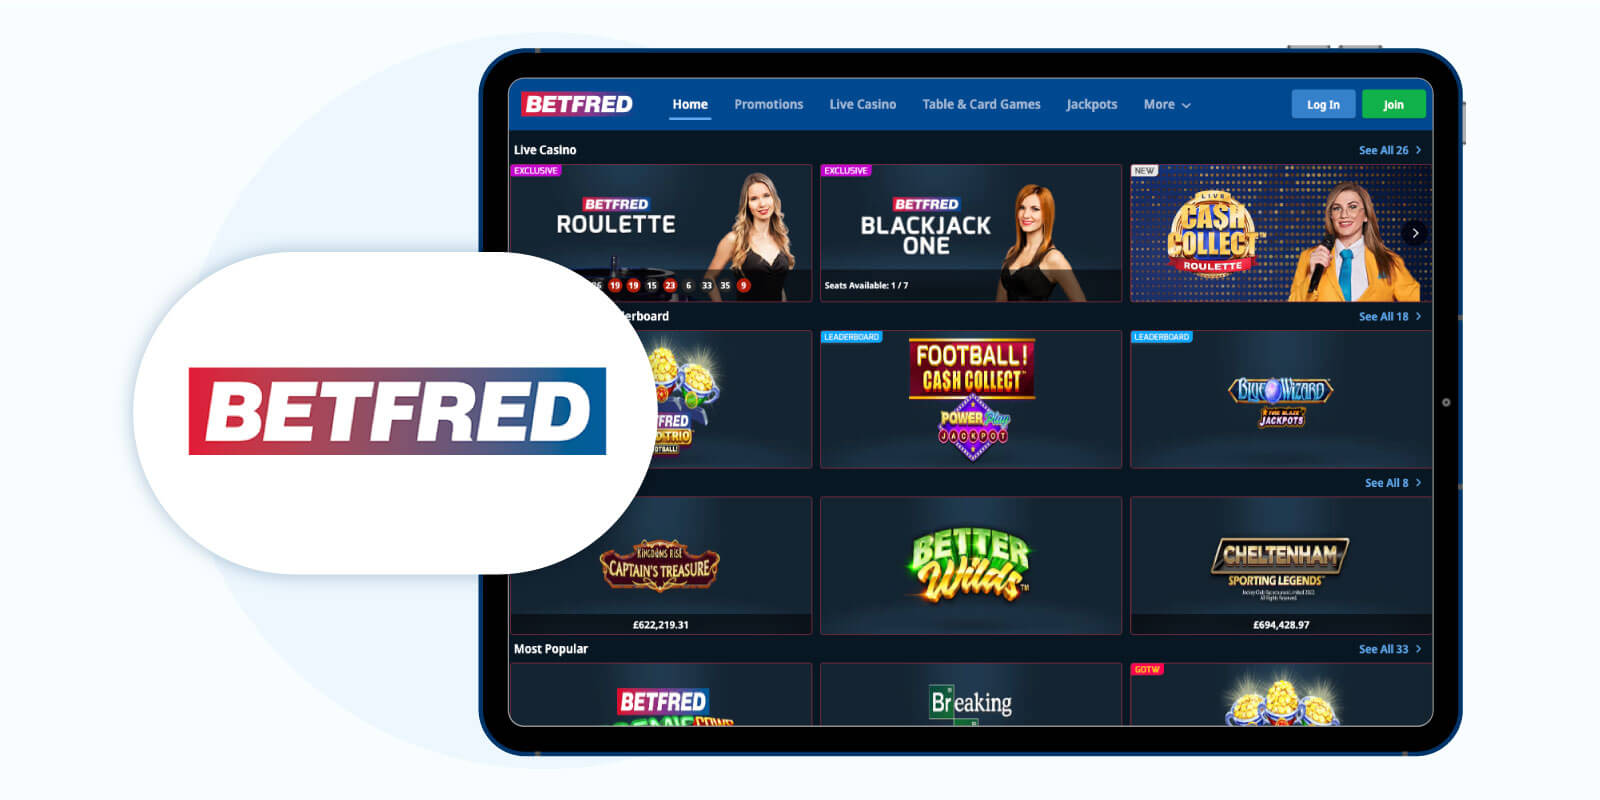 Betfred Casino - Top Microgaming Casino for Fast Withdrawals